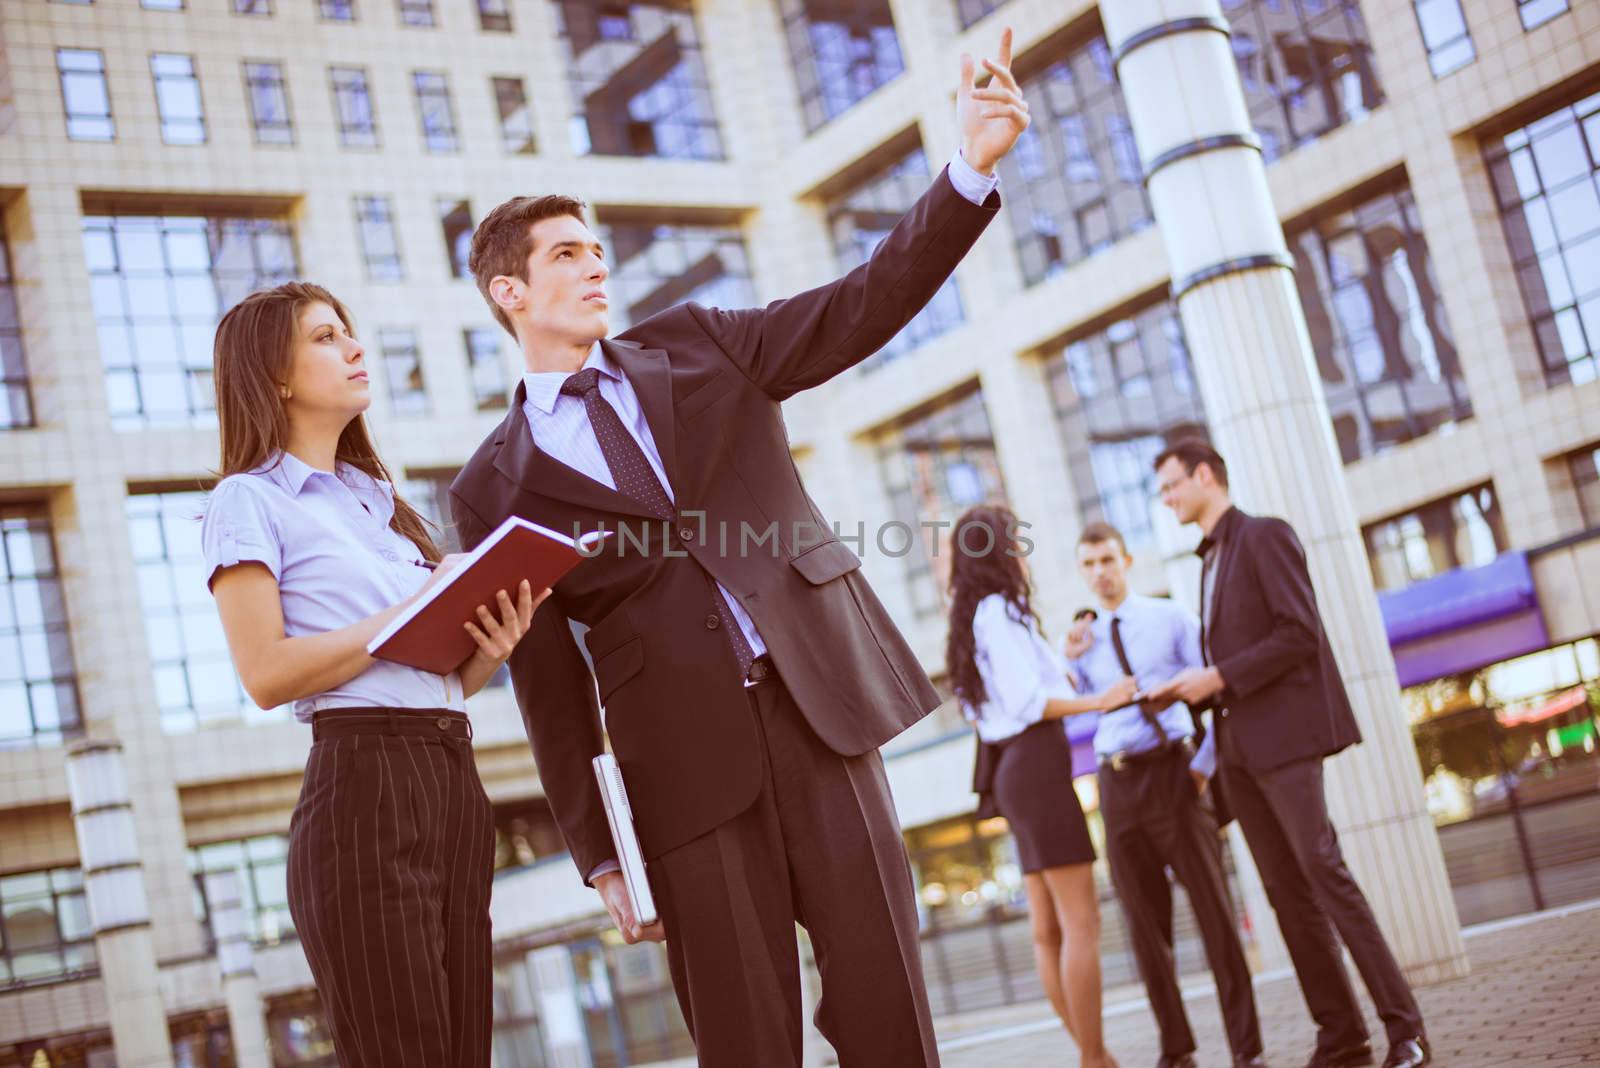 Young businessman and his secretary standing in front of office building.  Businessman hand pointing to the heights, and the secretary keeps the planner.